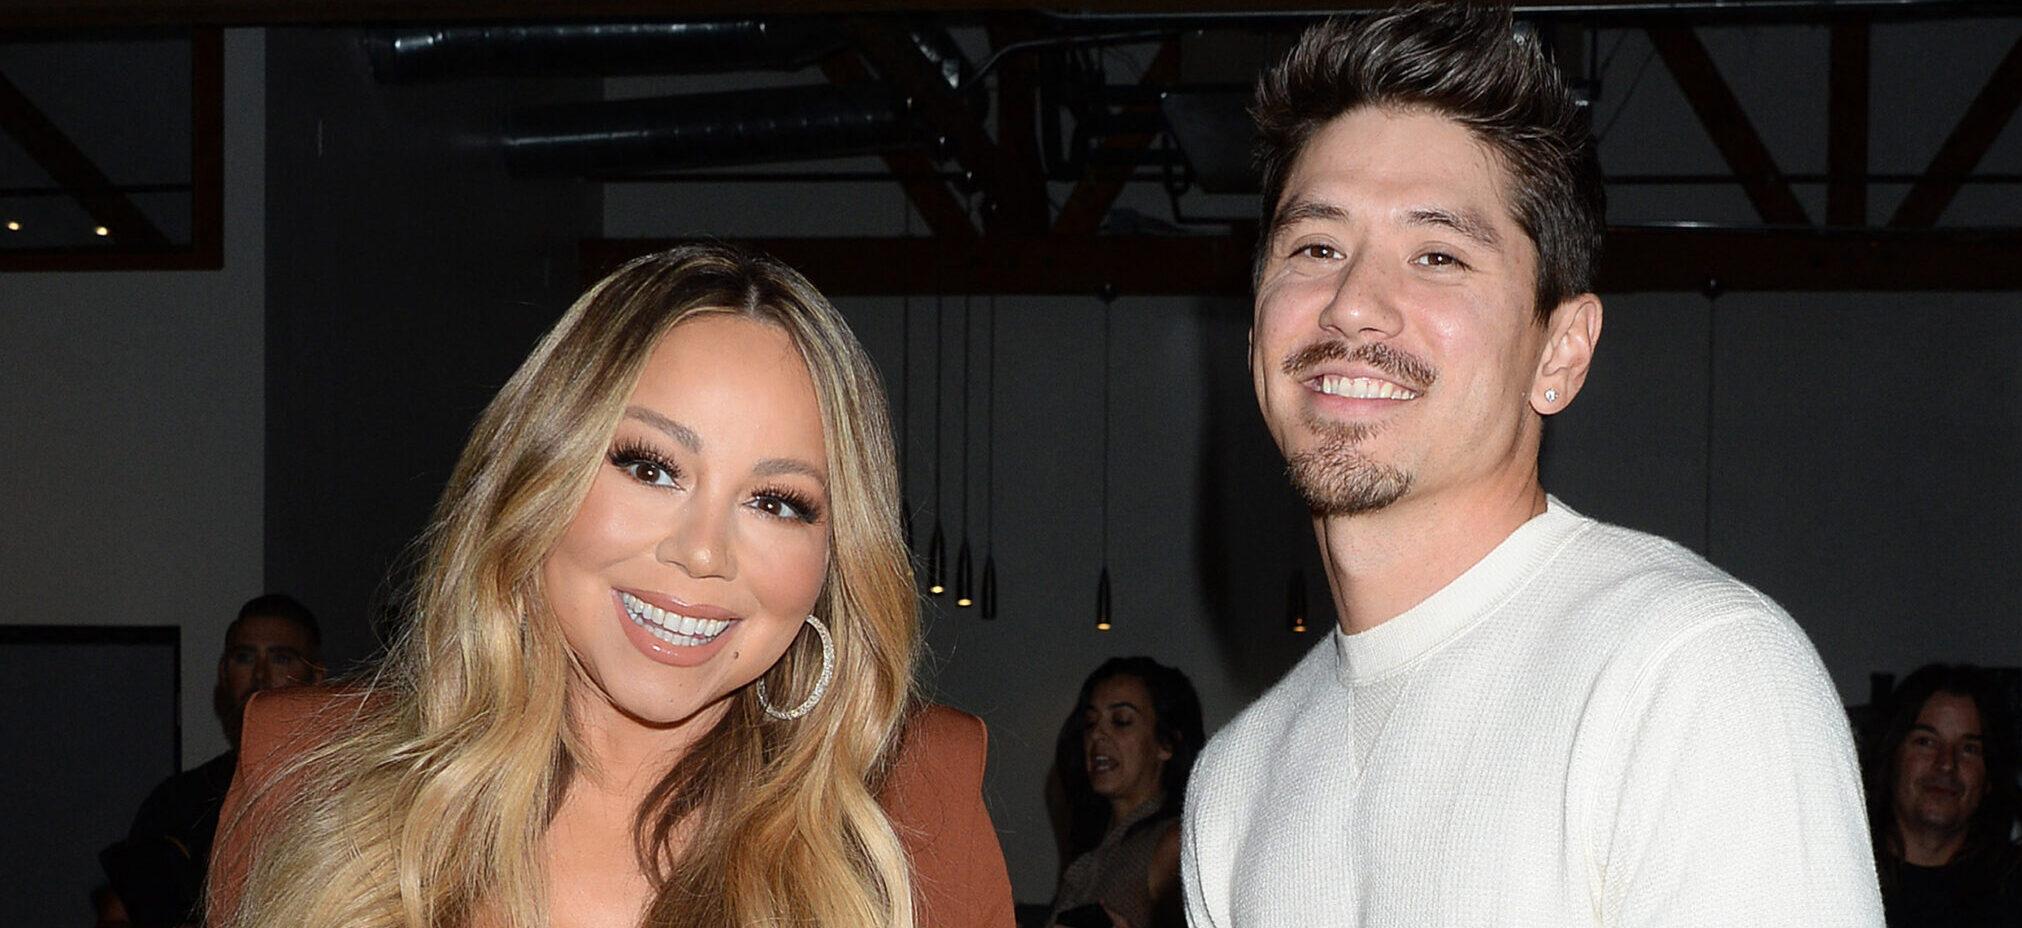 Inside Mariah Carey & Bryan Tanaka’s Break Up After Seven Years Together